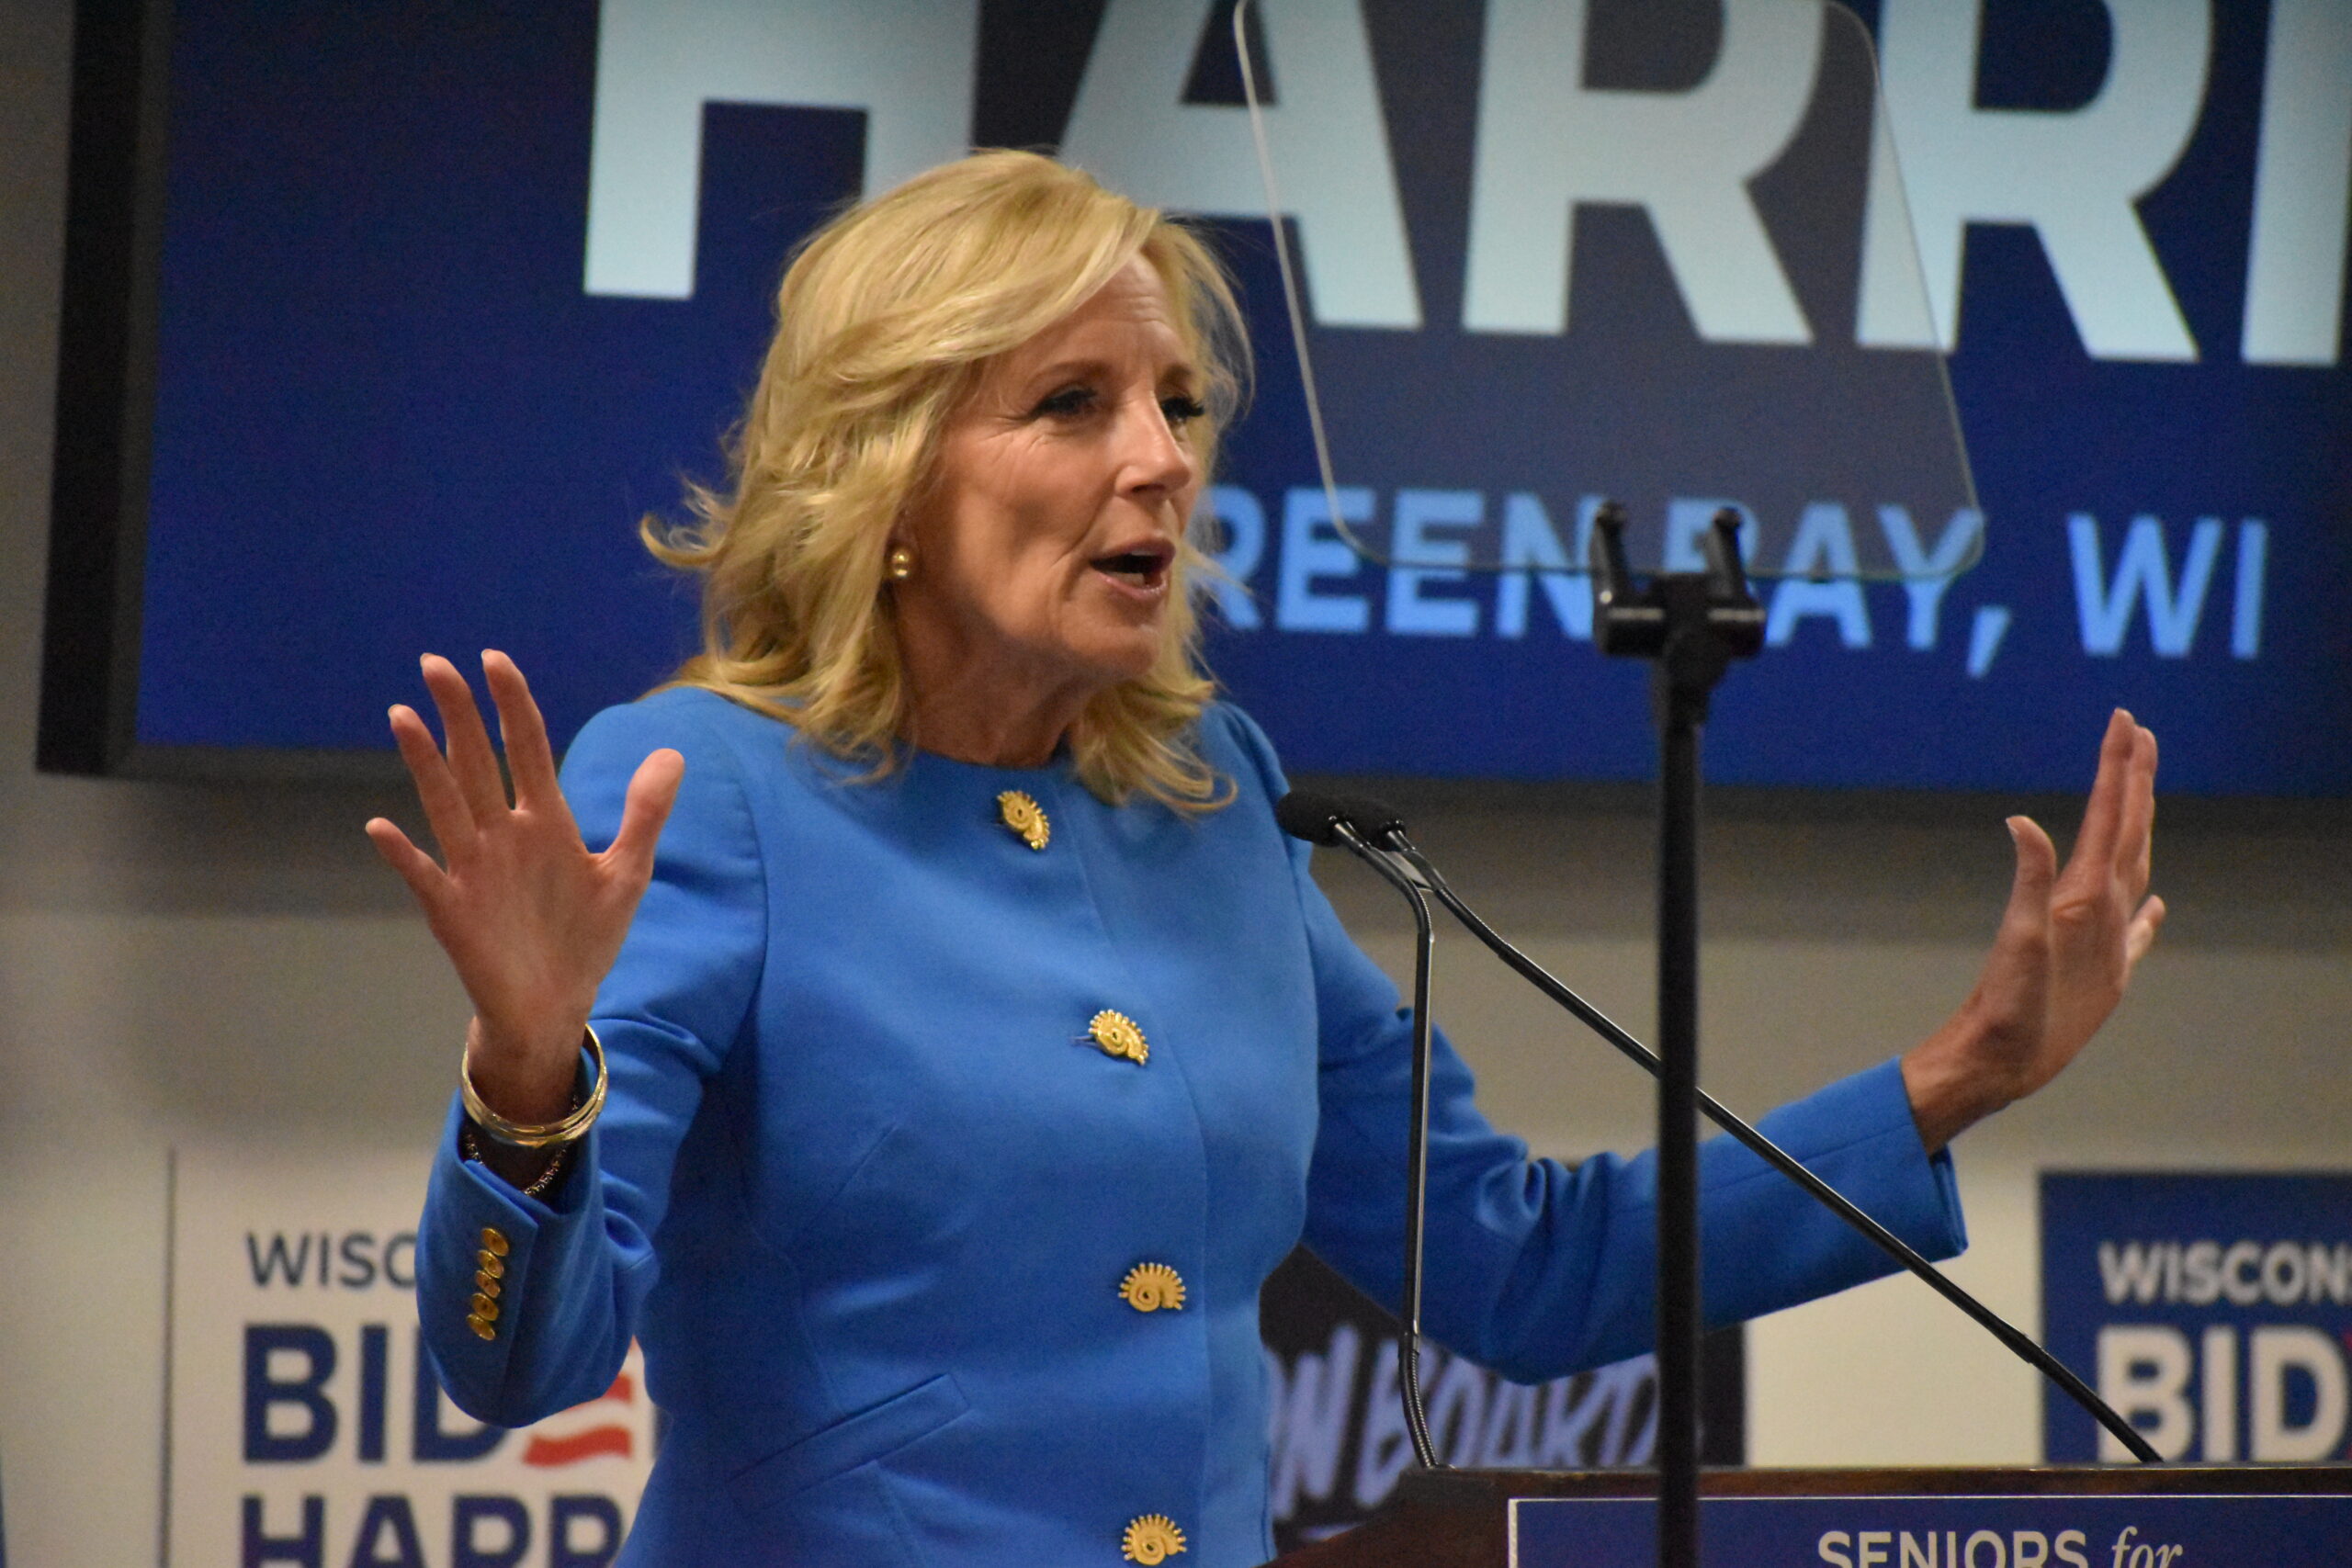 Jill Biden visits Green Bay to promote administration’s health care policies